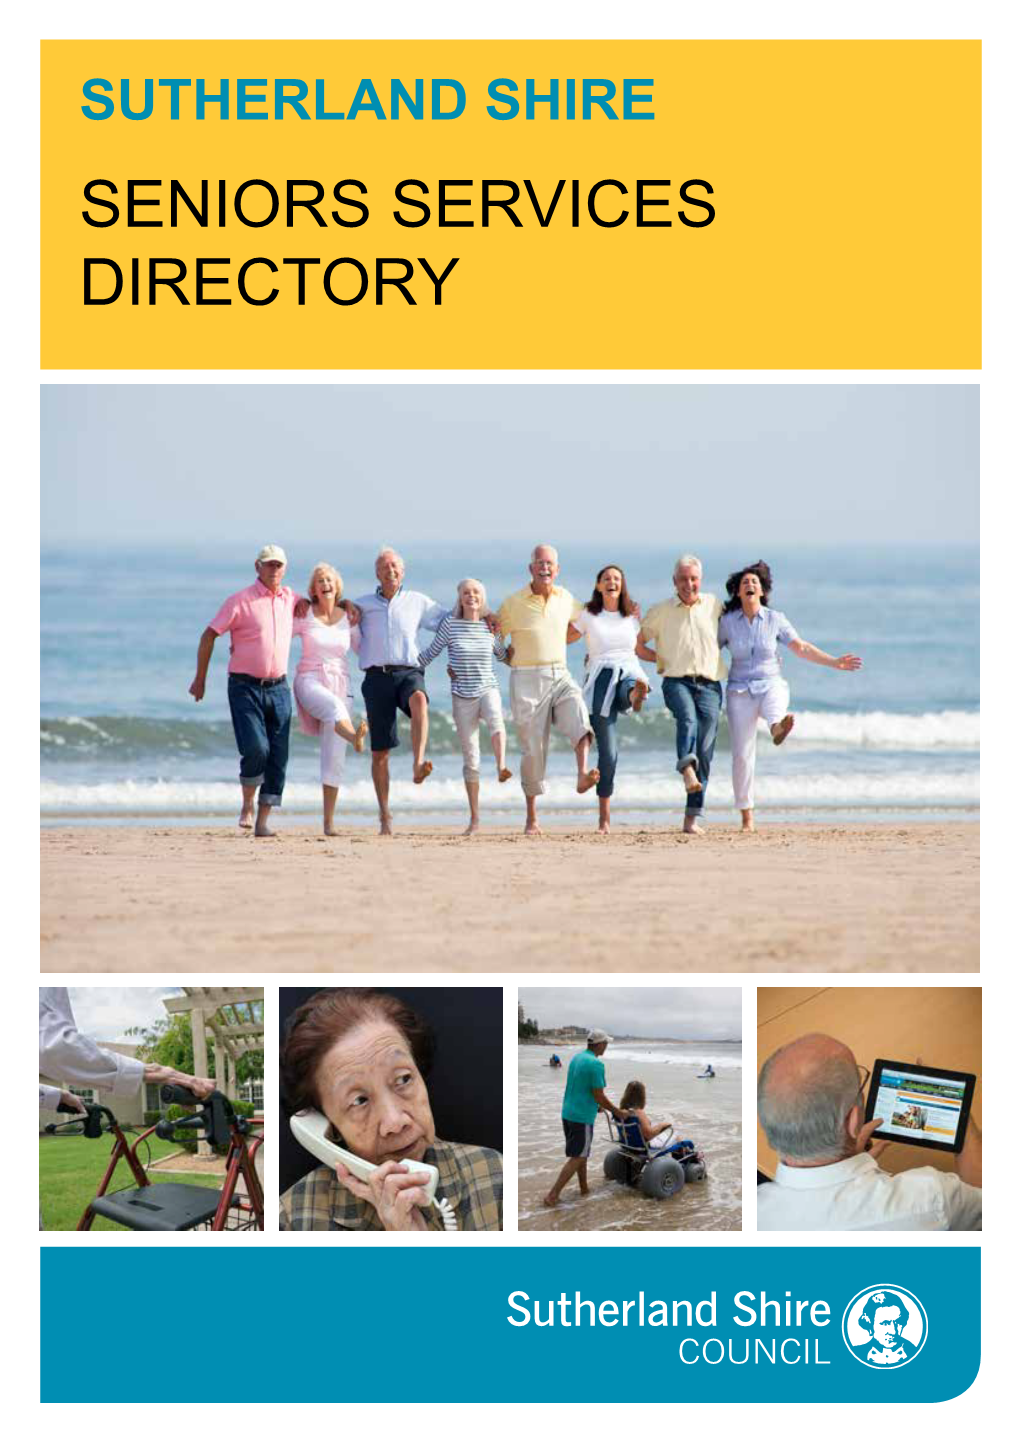 Seniors Services Directory Table of Contents